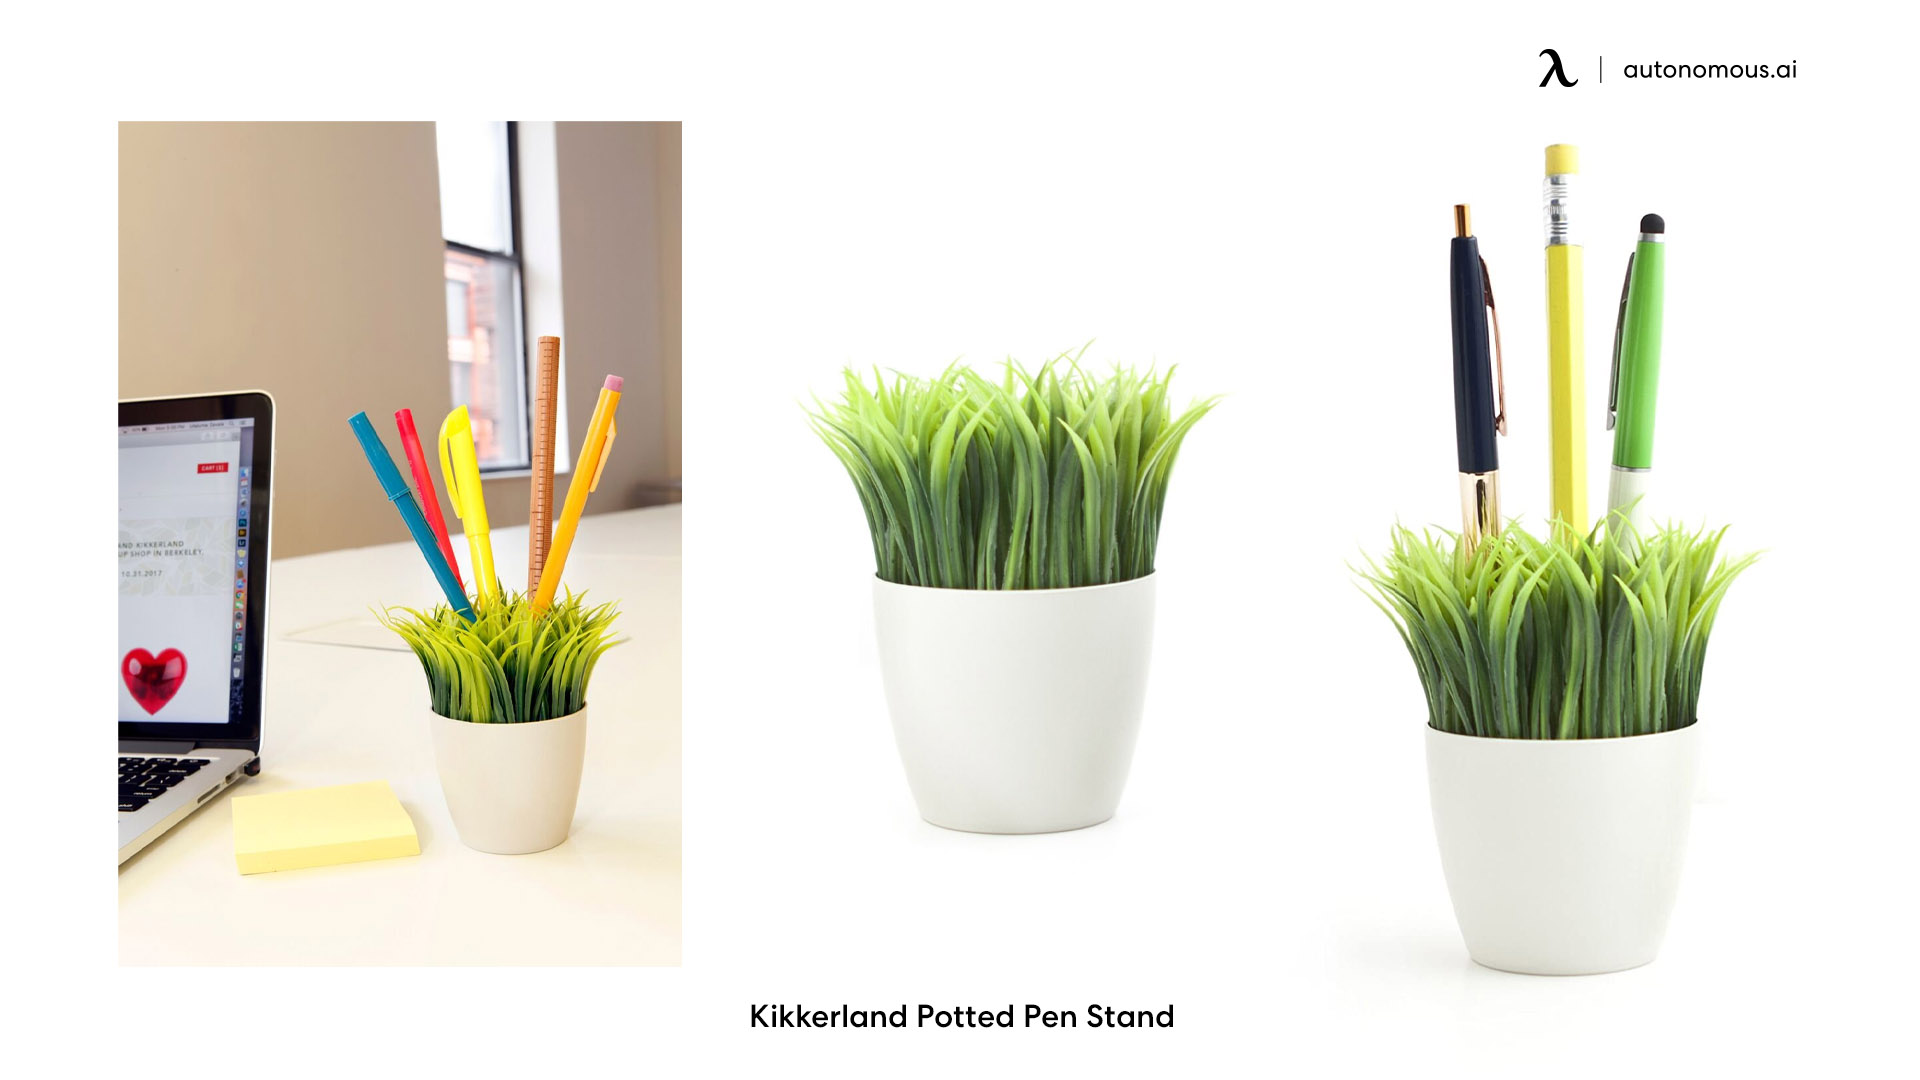 Kikkerland Potted Pen Stand white desk accessories